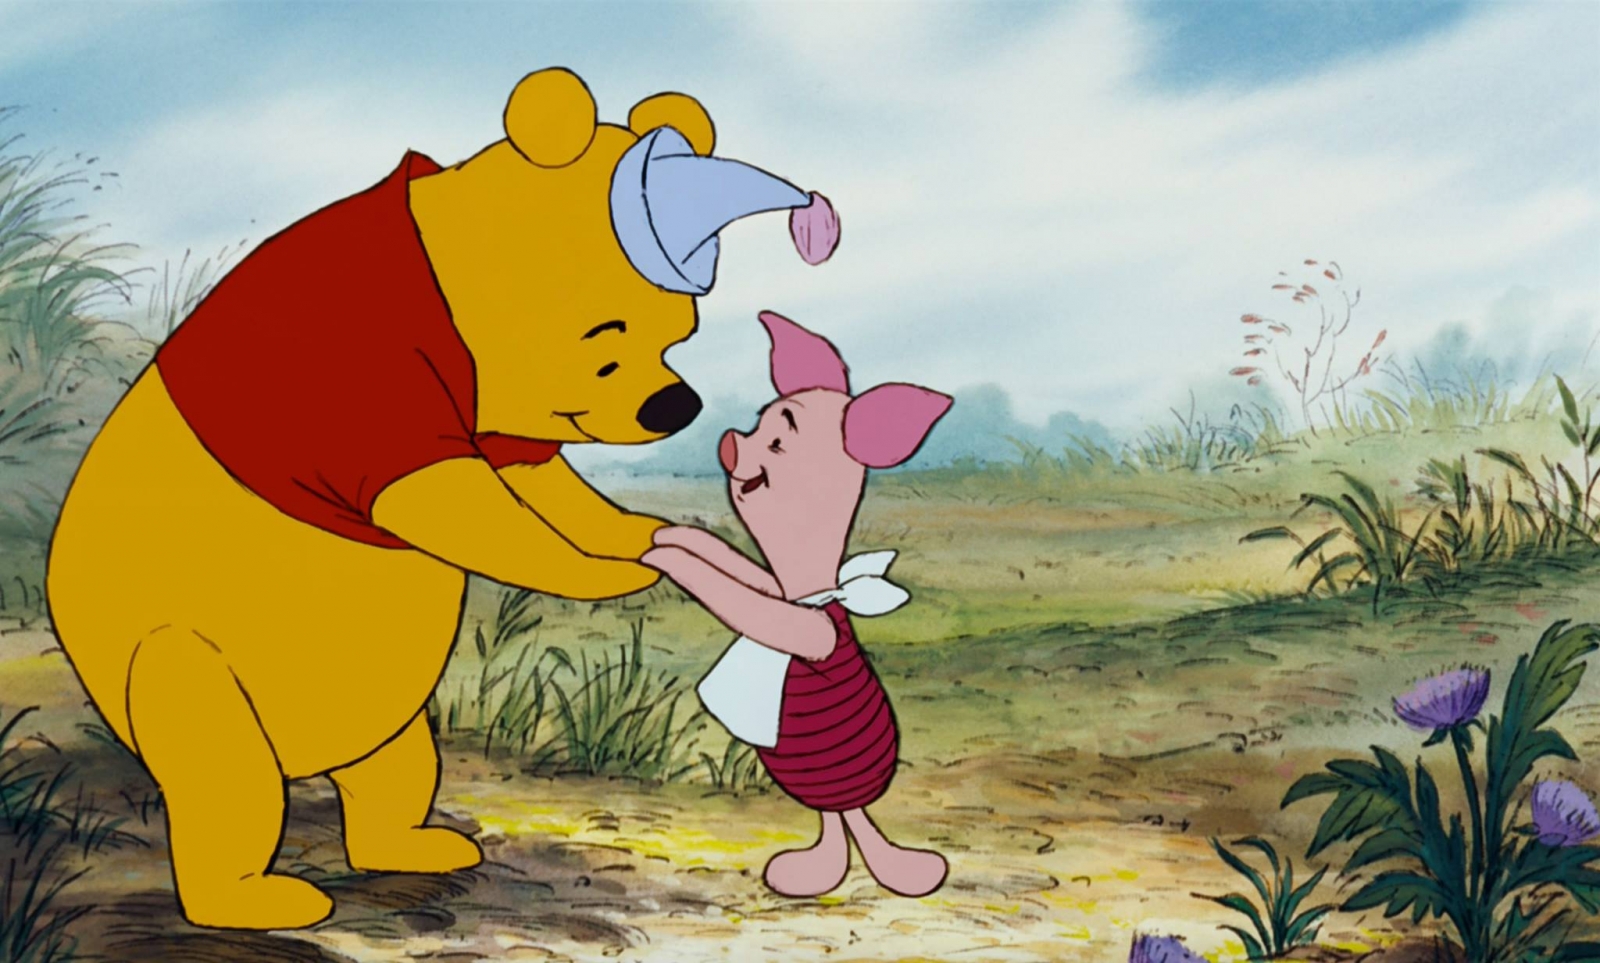 Winnie the Pooh creator AA Milne 135th birthday: Top quotes from the